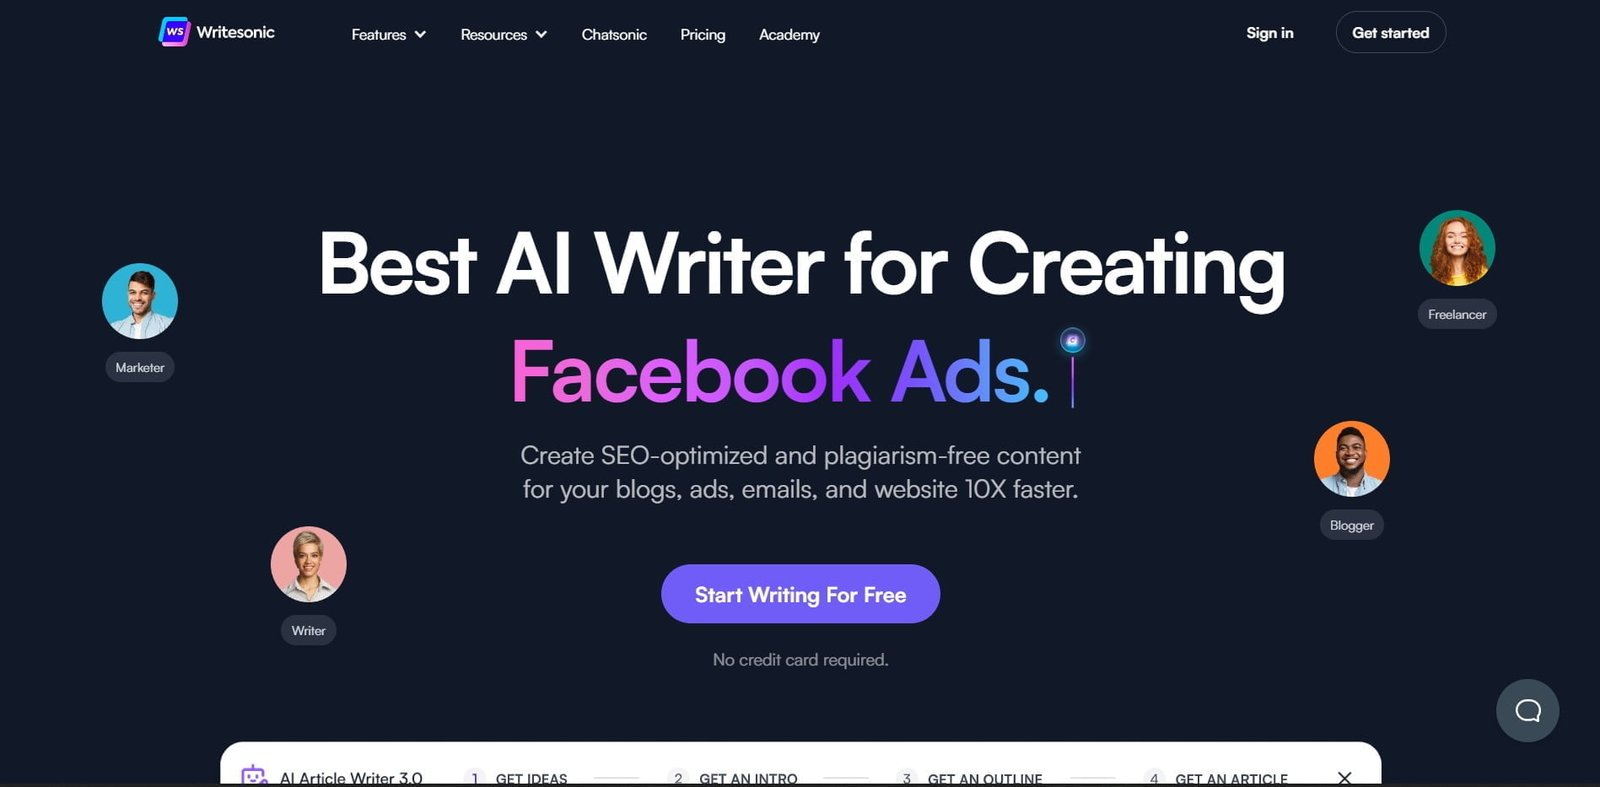 WriteSonic is an AI-powered writing assistant that helps users create compelling content